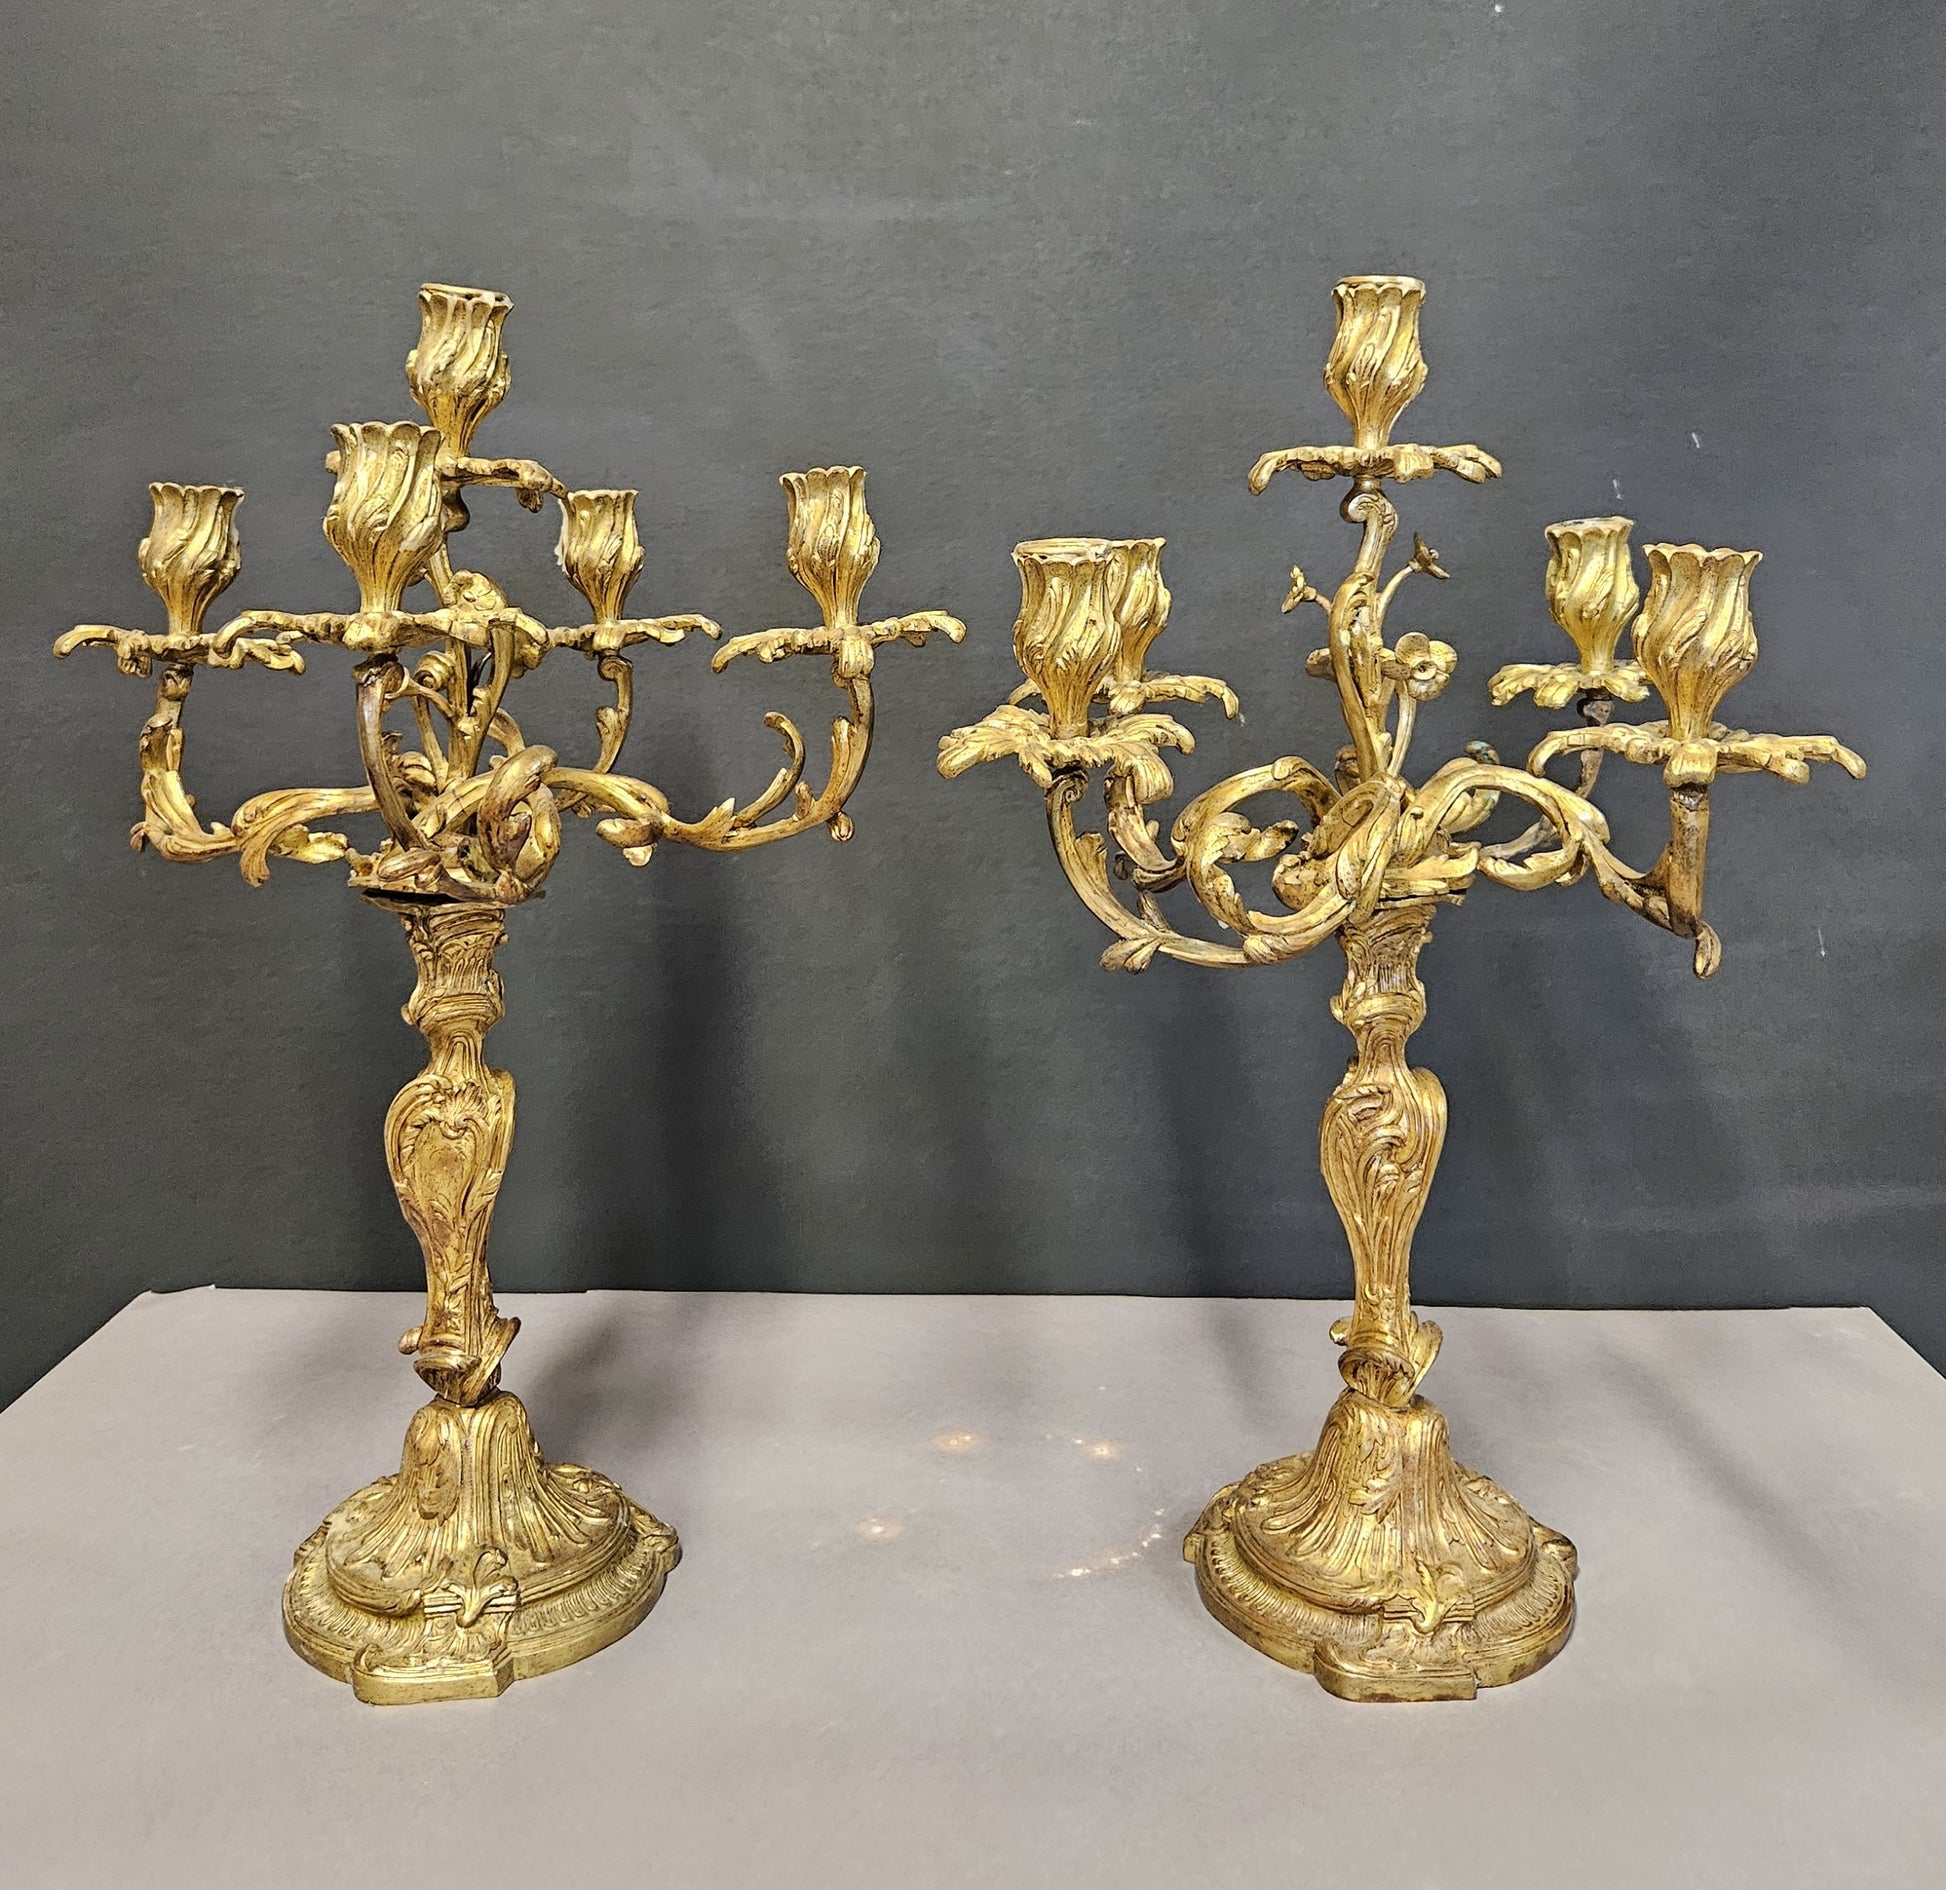 view of both candelabra